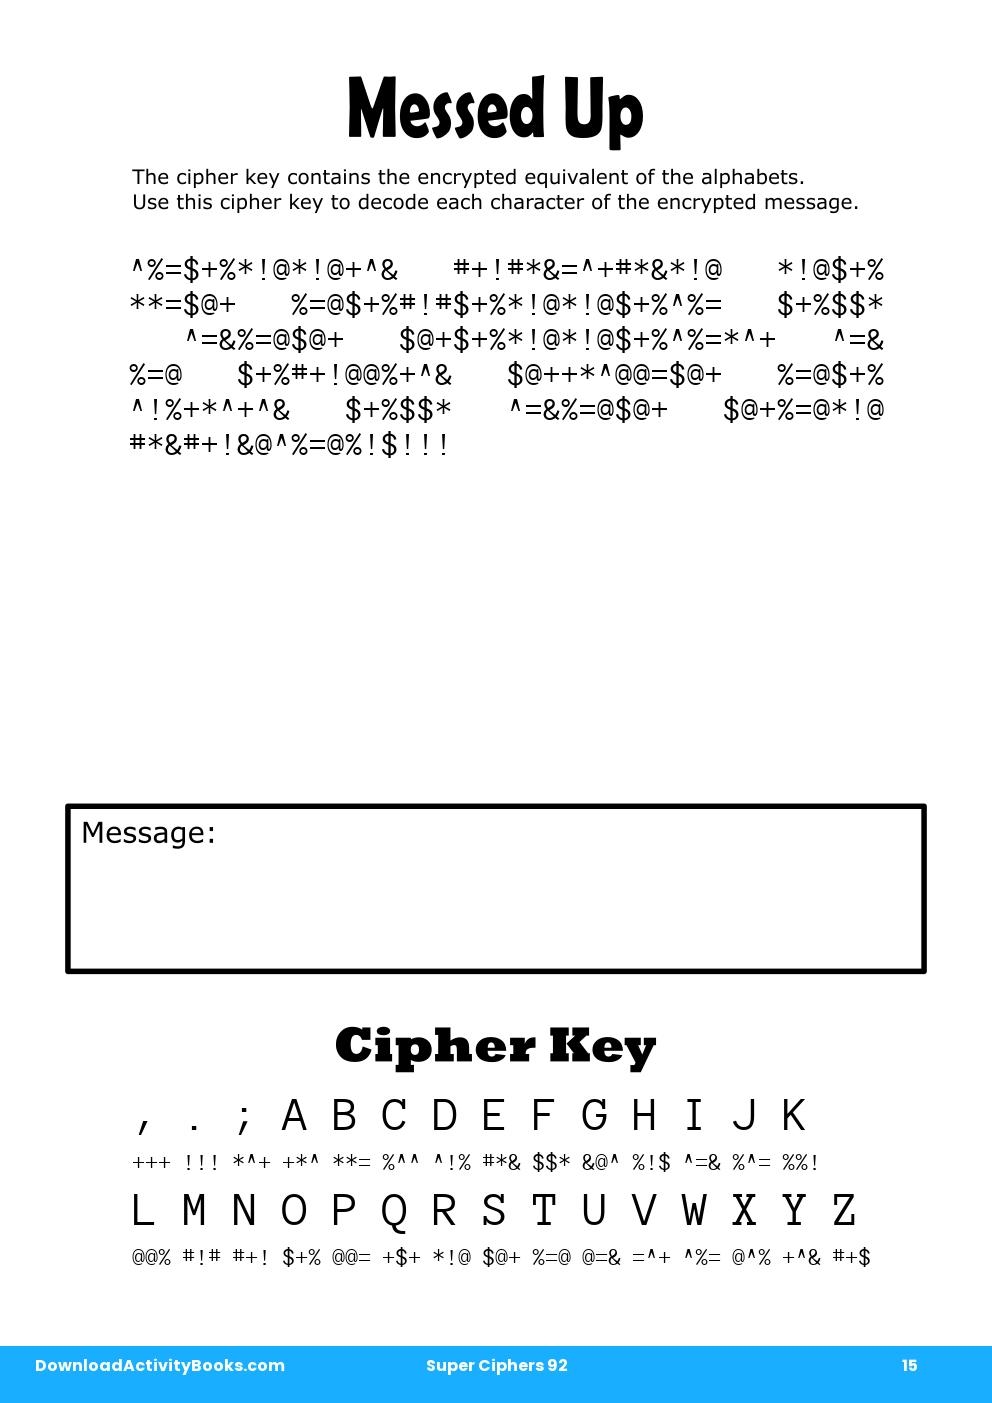 Messed Up in Super Ciphers 92